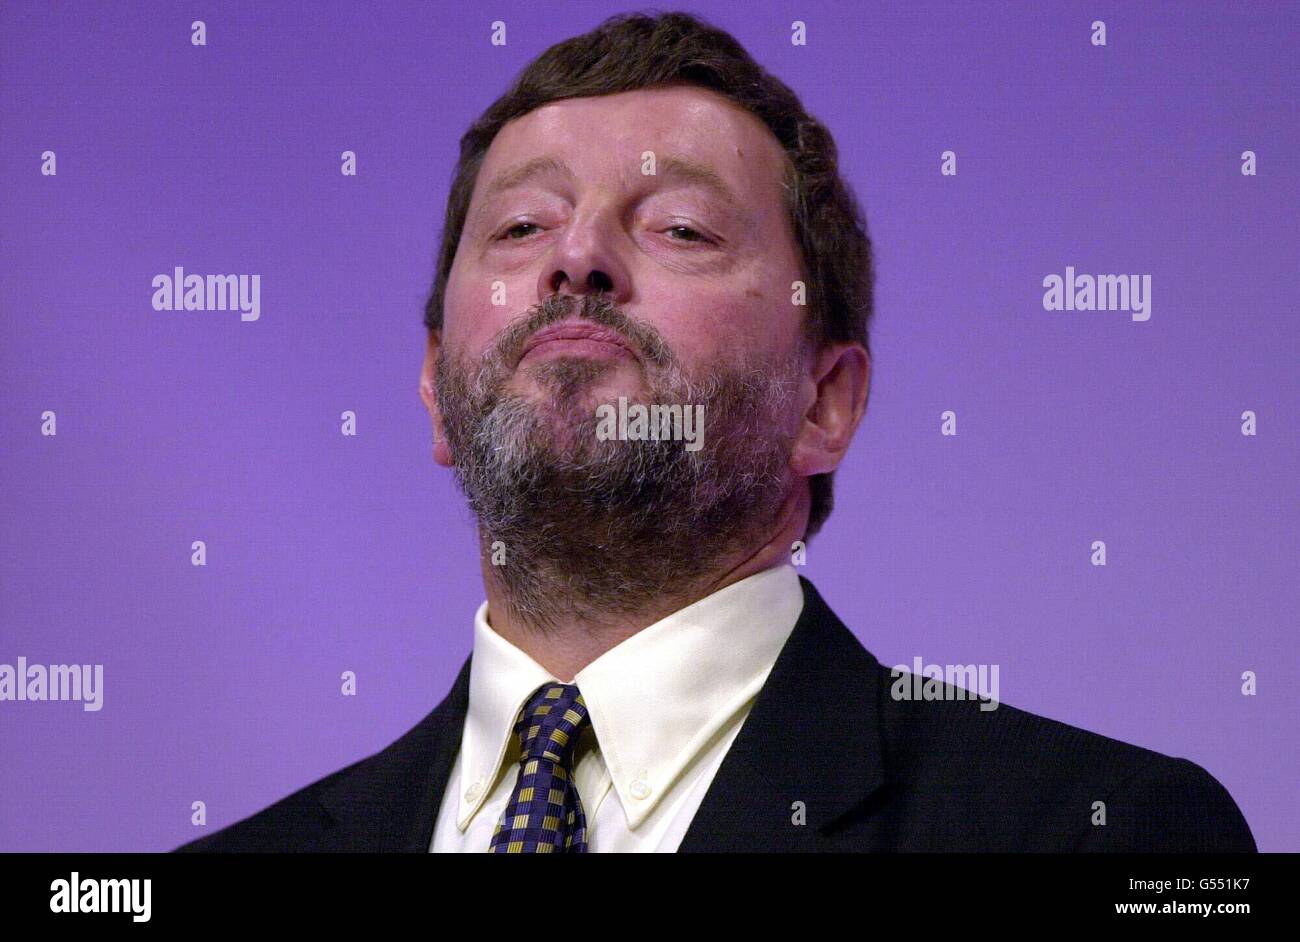 Education Secretary David Blunkett delivers his speech to party members, during the fourth day of the Labour Party Conference in Brighton. * 20/10/2000: An end to the long-running battle between the government and teachers over performance-related pay was in sight as both sides were poised to accept the outcome of a review of the scheme. 26/01/01: Headteachers announced a go-slow on red tape. They declared war on unrealistic expectations, frequent initiatives, last-minute policy changes and duplicated demands from Whitehall, local councils and education watchdog Ofsted. The Department for Stock Photo